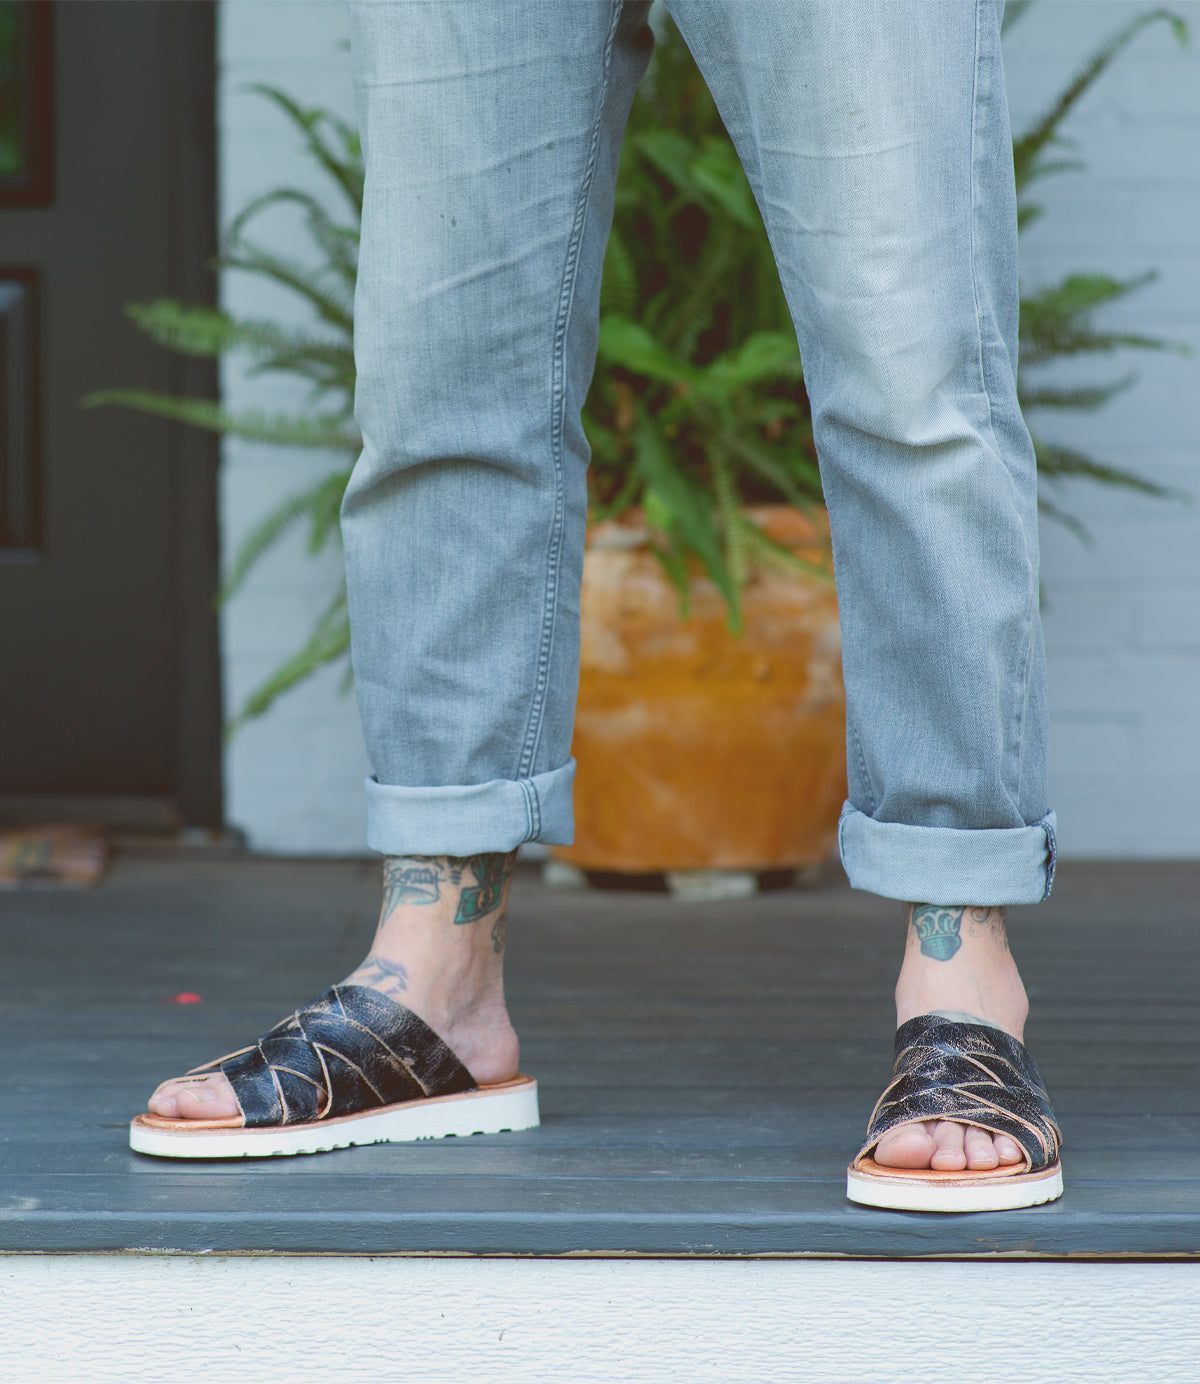 A person wearing Abraham Light jeans and Bed Stu black leather sandals stands on a white doorstep, revealing tattooed ankles.